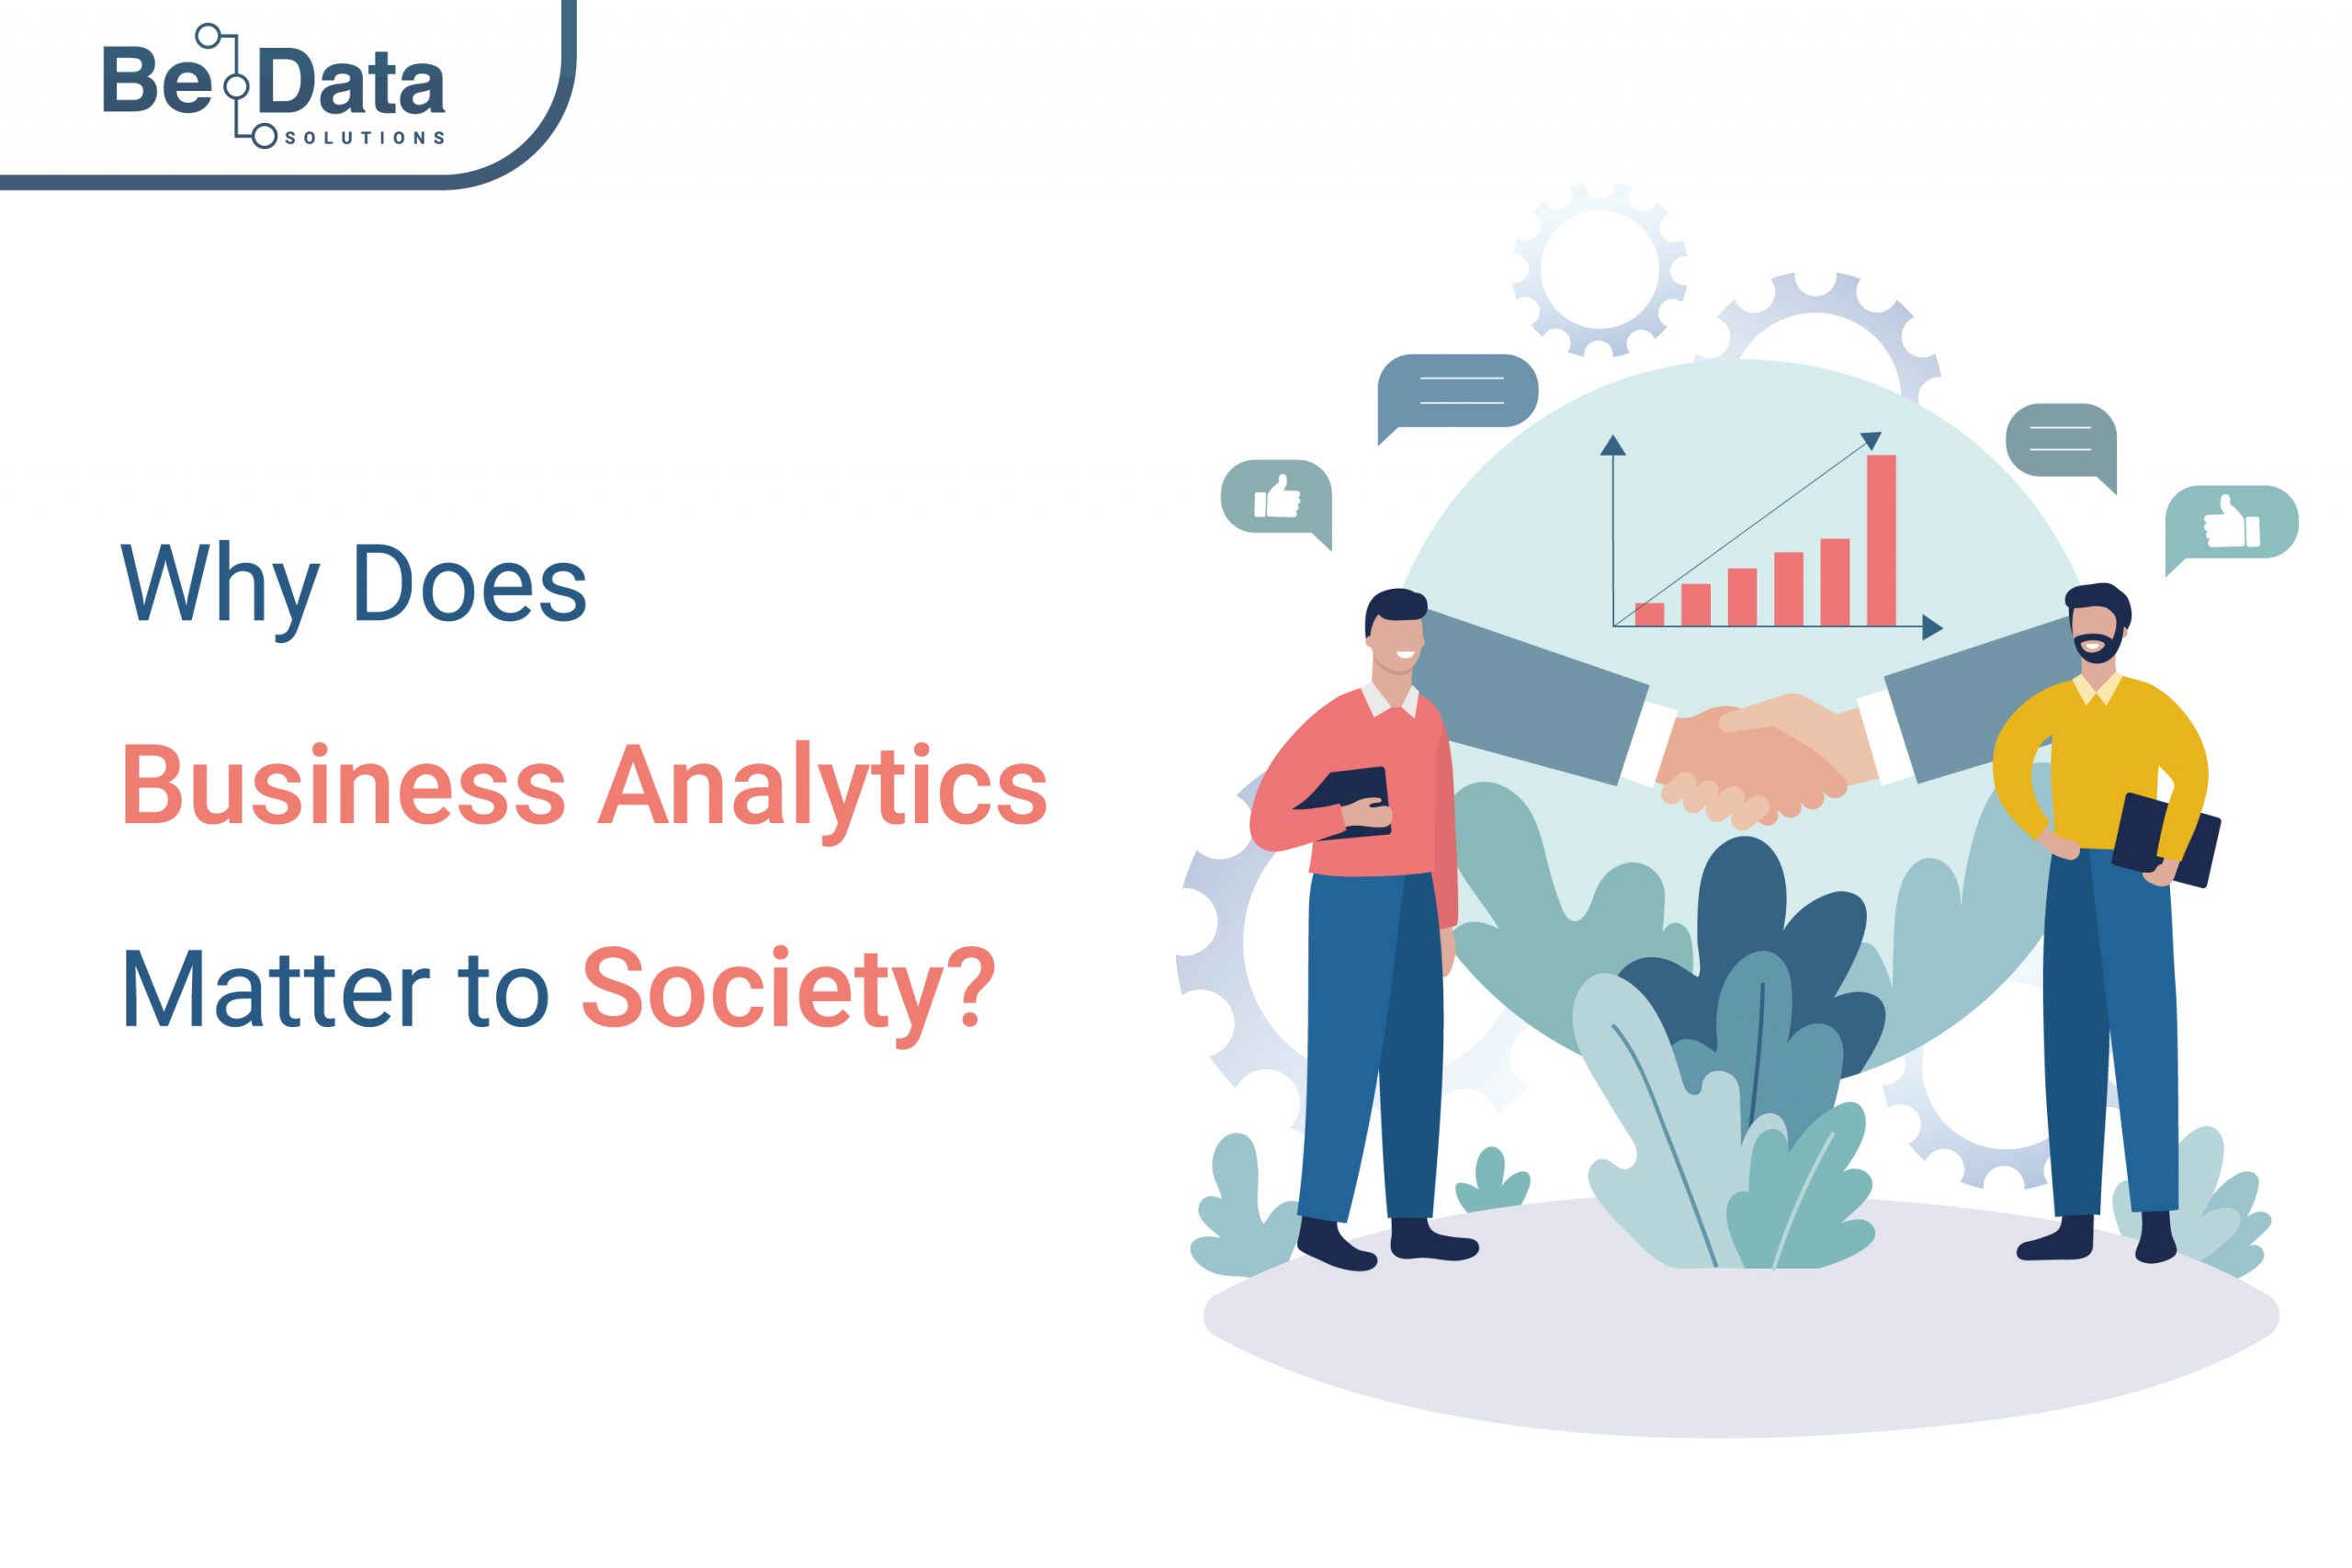 Why Does Business Analytics Matter to Society?